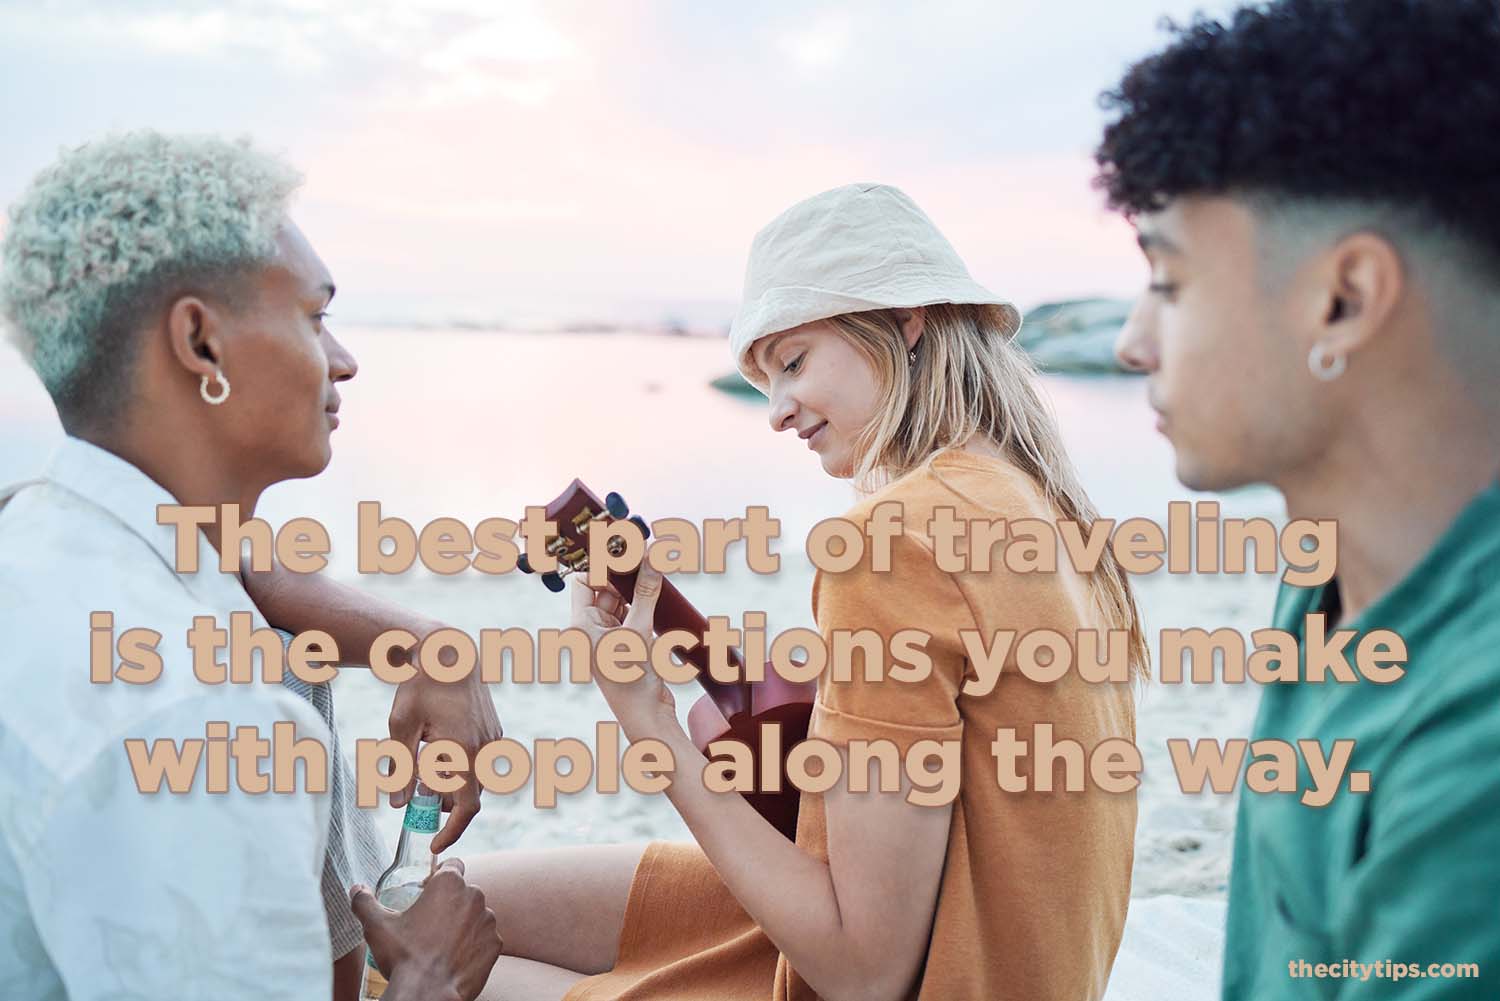 "The best part of traveling is the connections you make with people along the way." by Anonymous